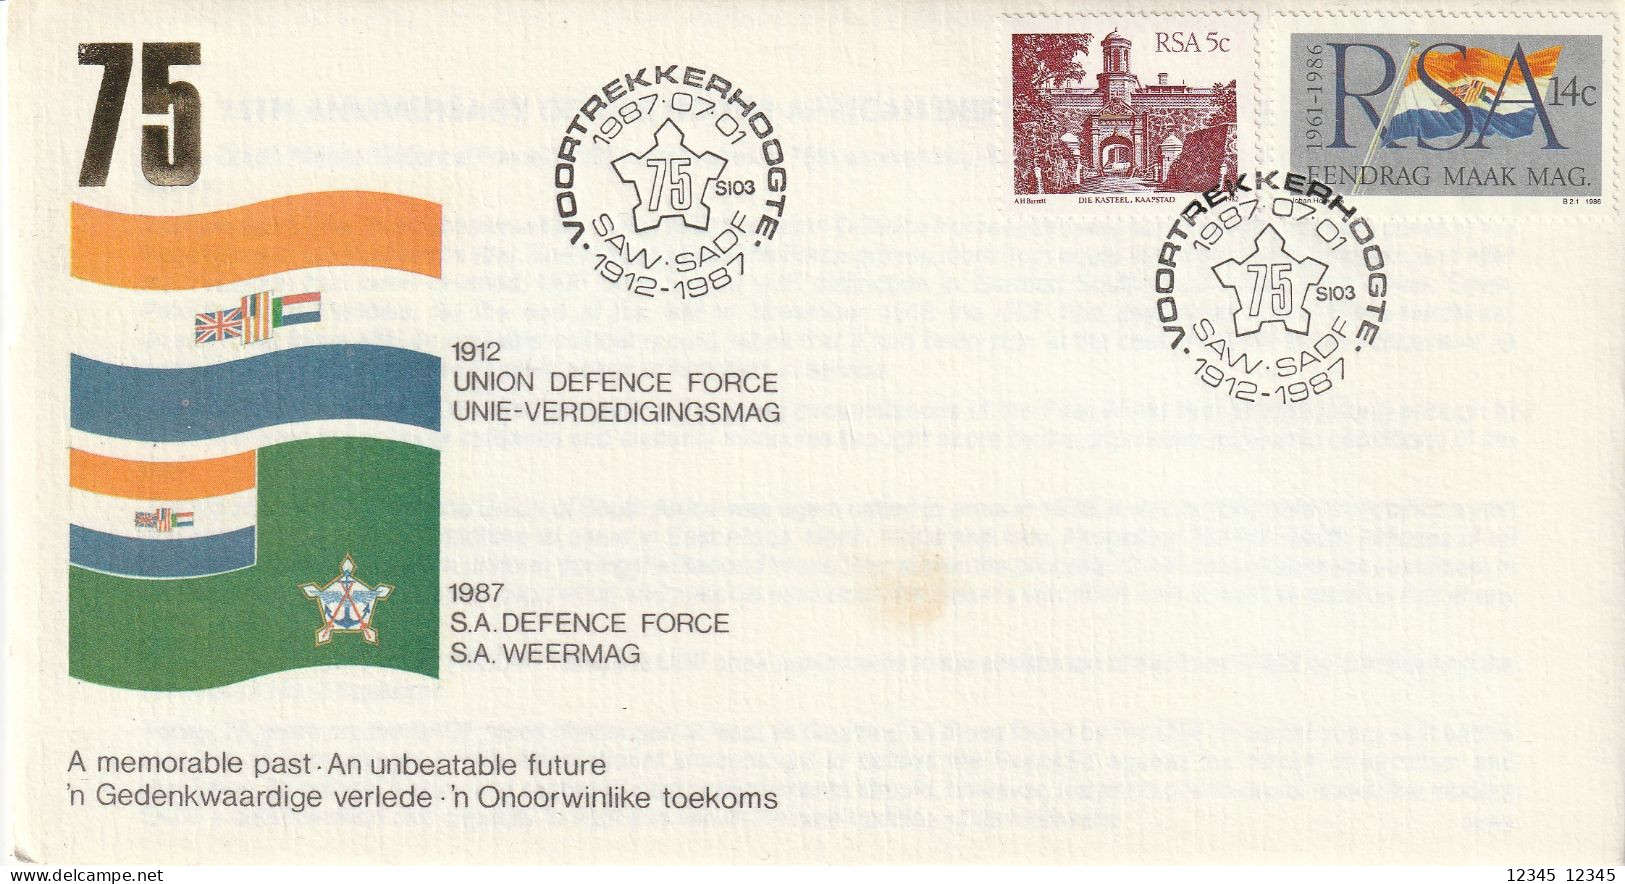 Zuid Afrika 1987, 1912 Union Defence Force 1987 S.A. Defence Force - Briefe U. Dokumente